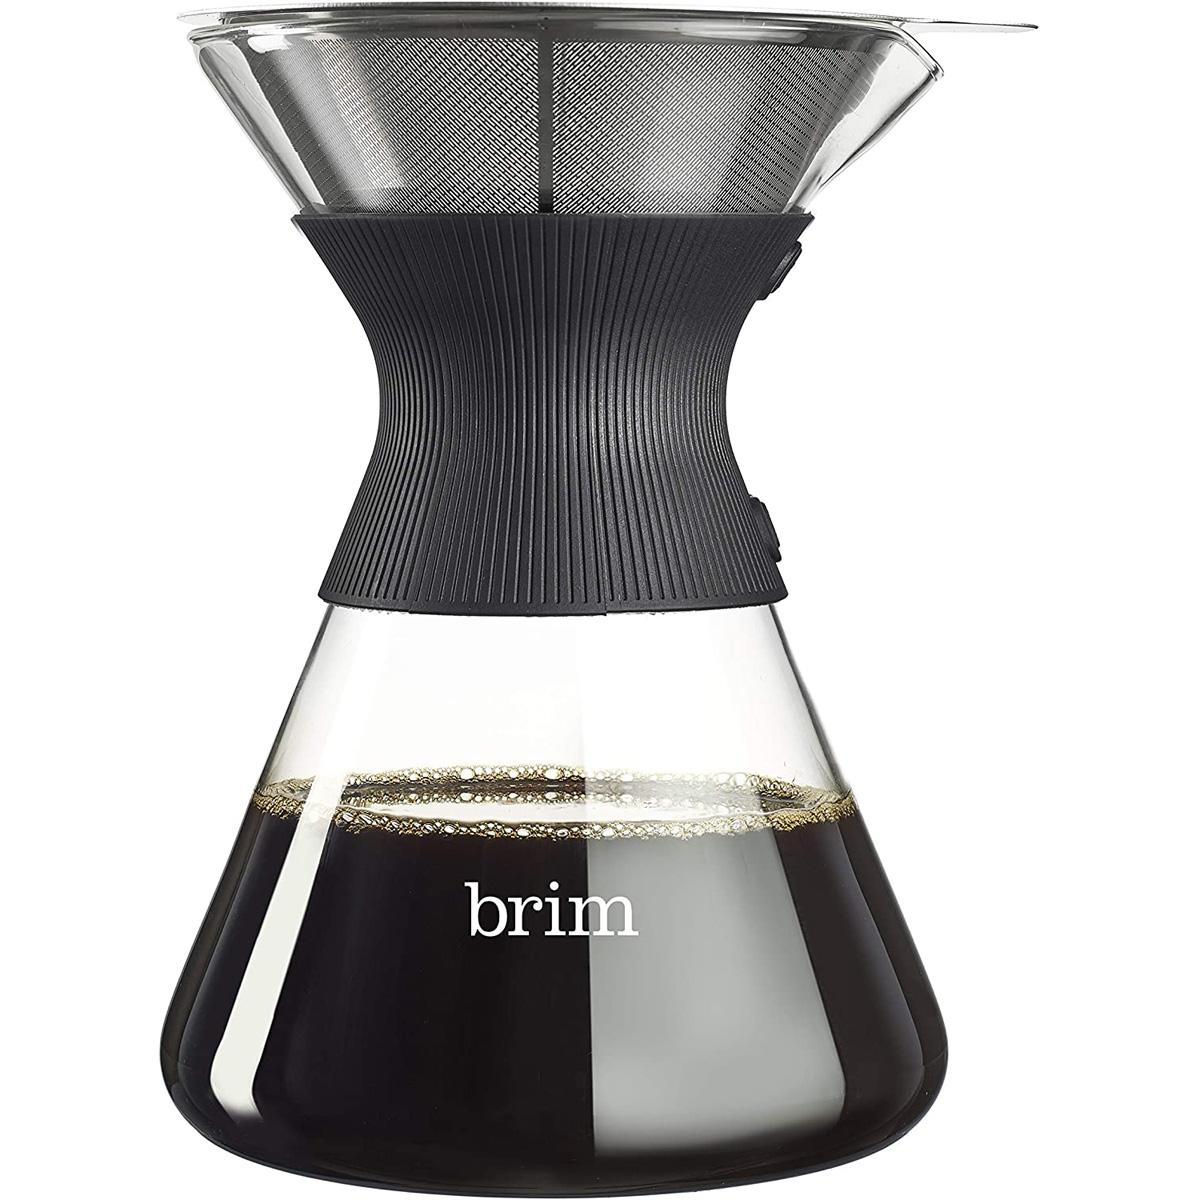 Brim 6 Cup Pour Over Coffee Maker Kit for $12.99